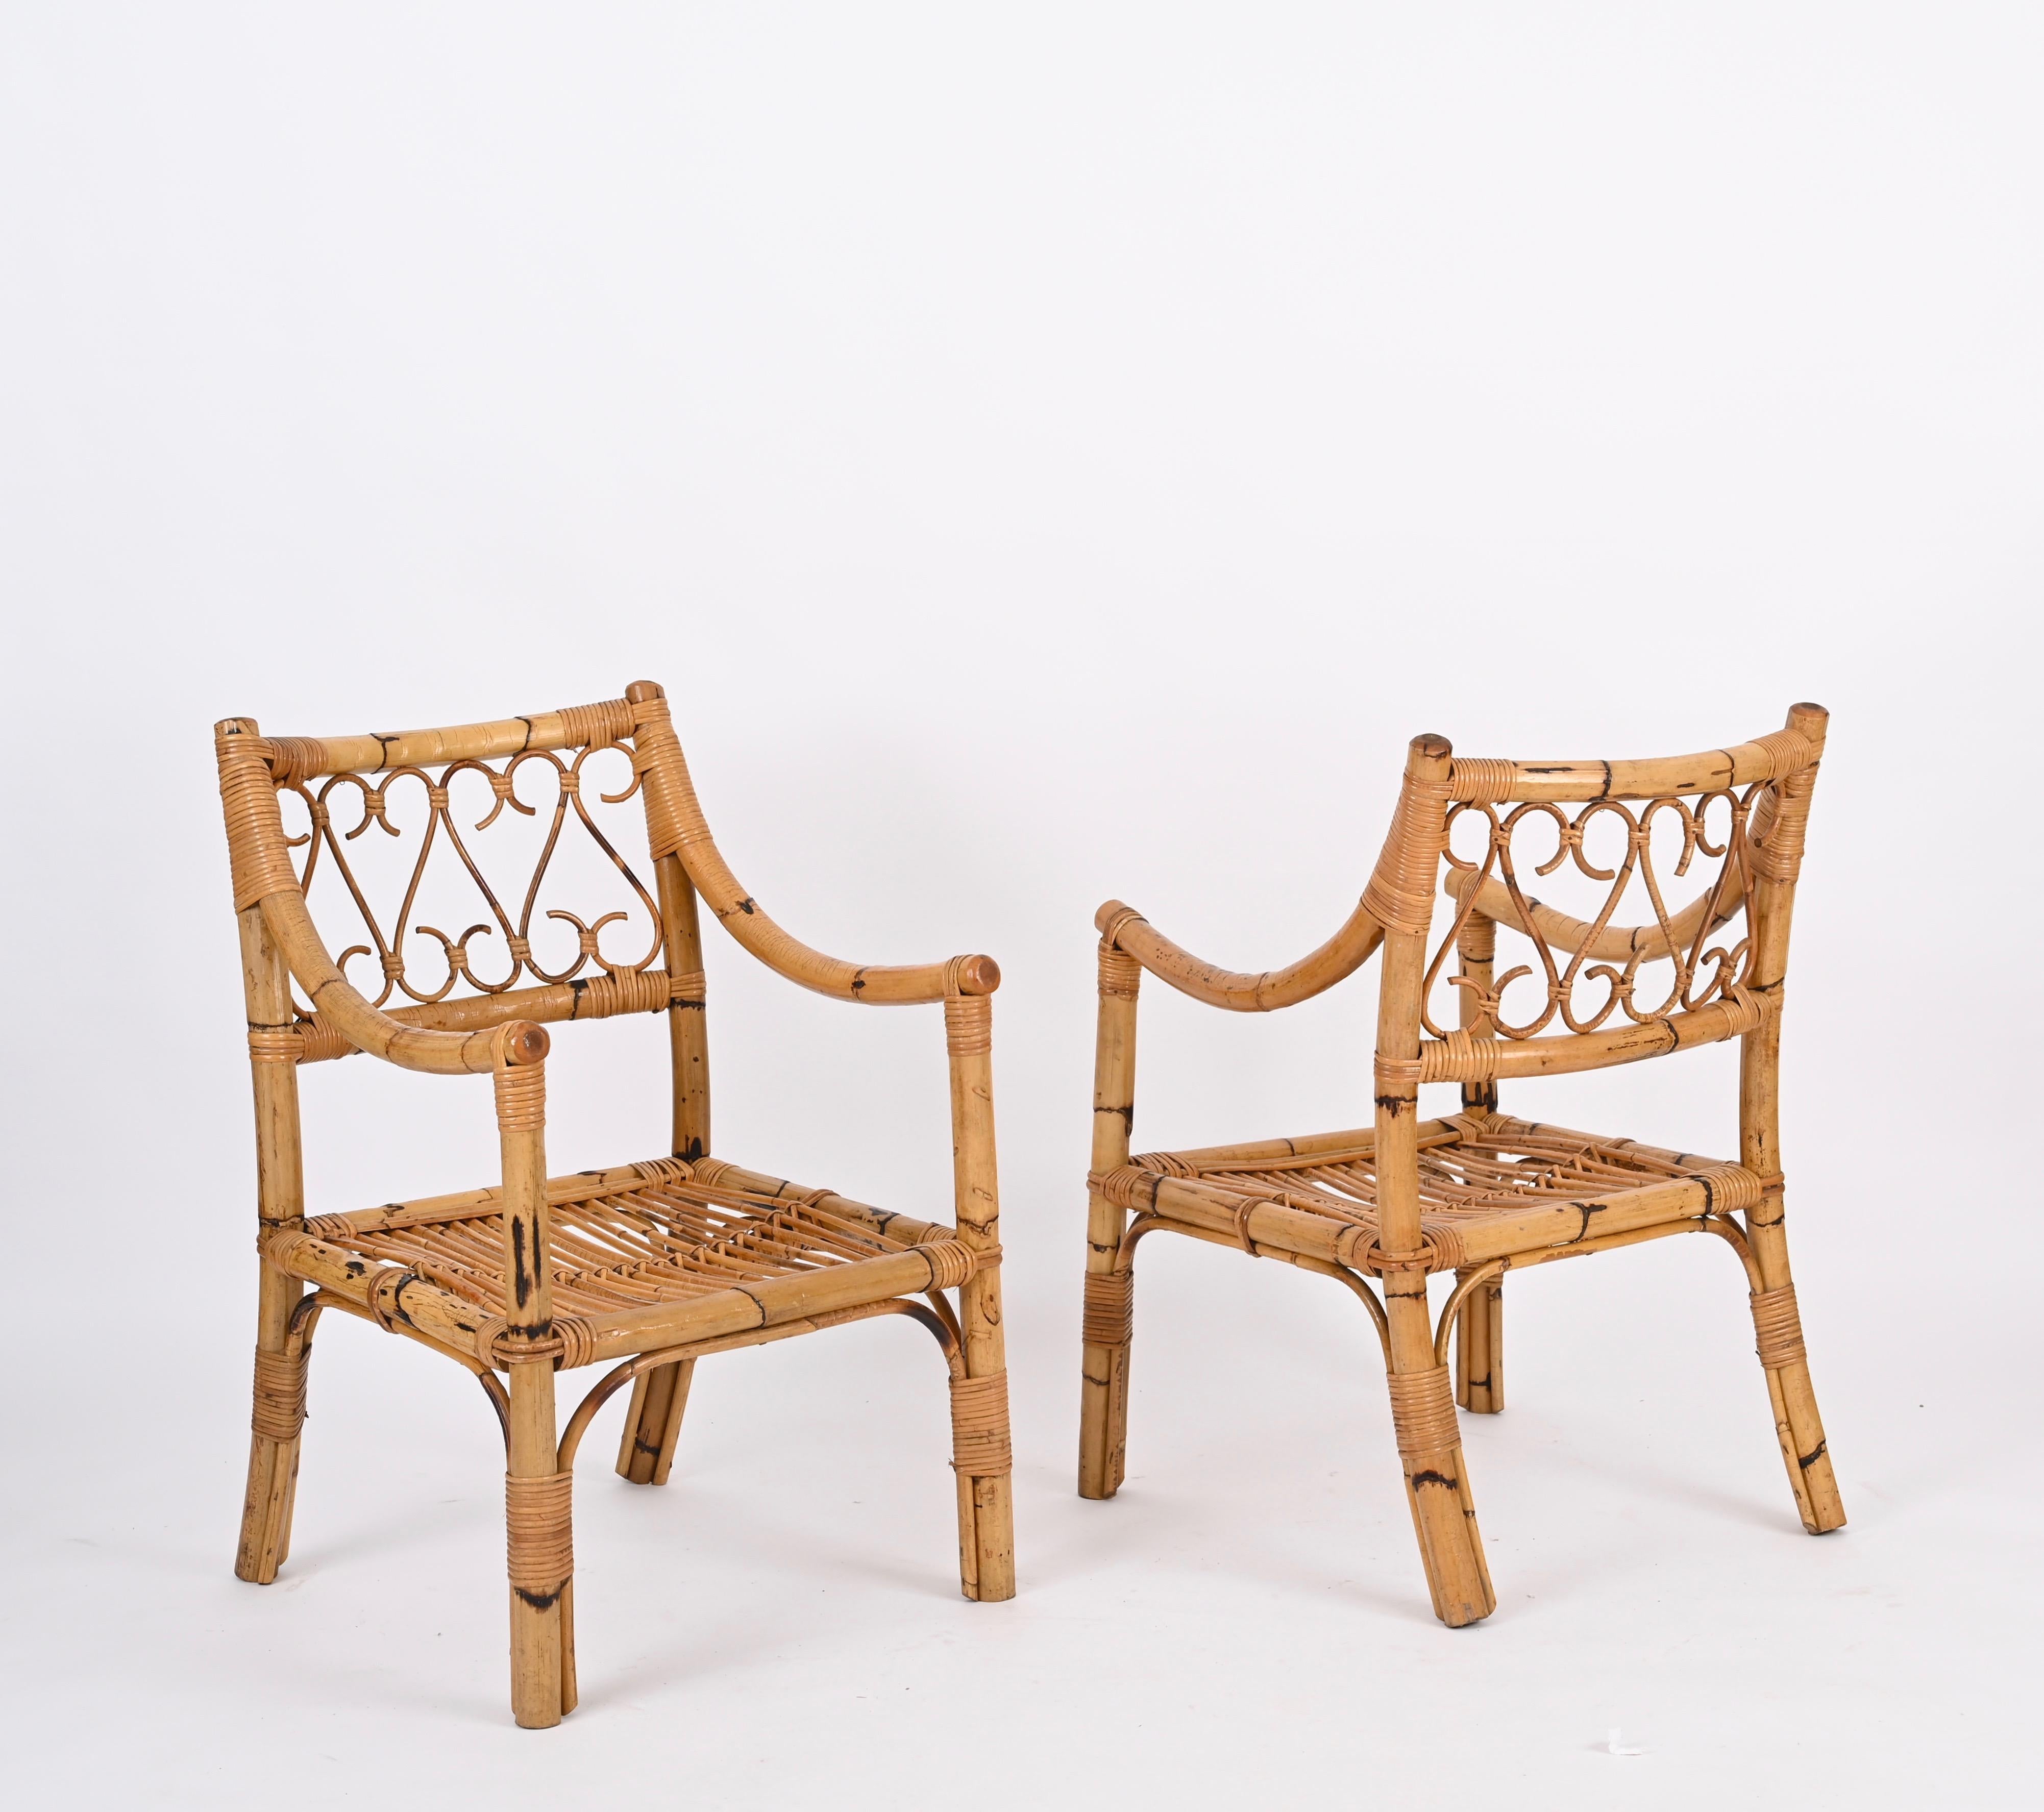 Pair of fantastic Mid-Century armchairs fully made in bamboo, rattan and wicker. This incredible set was produced in Italy by Vivai del Sud during the 1970s.

These comfortable armchairs have a structure made in sturdy curved bamboo, the backrest is